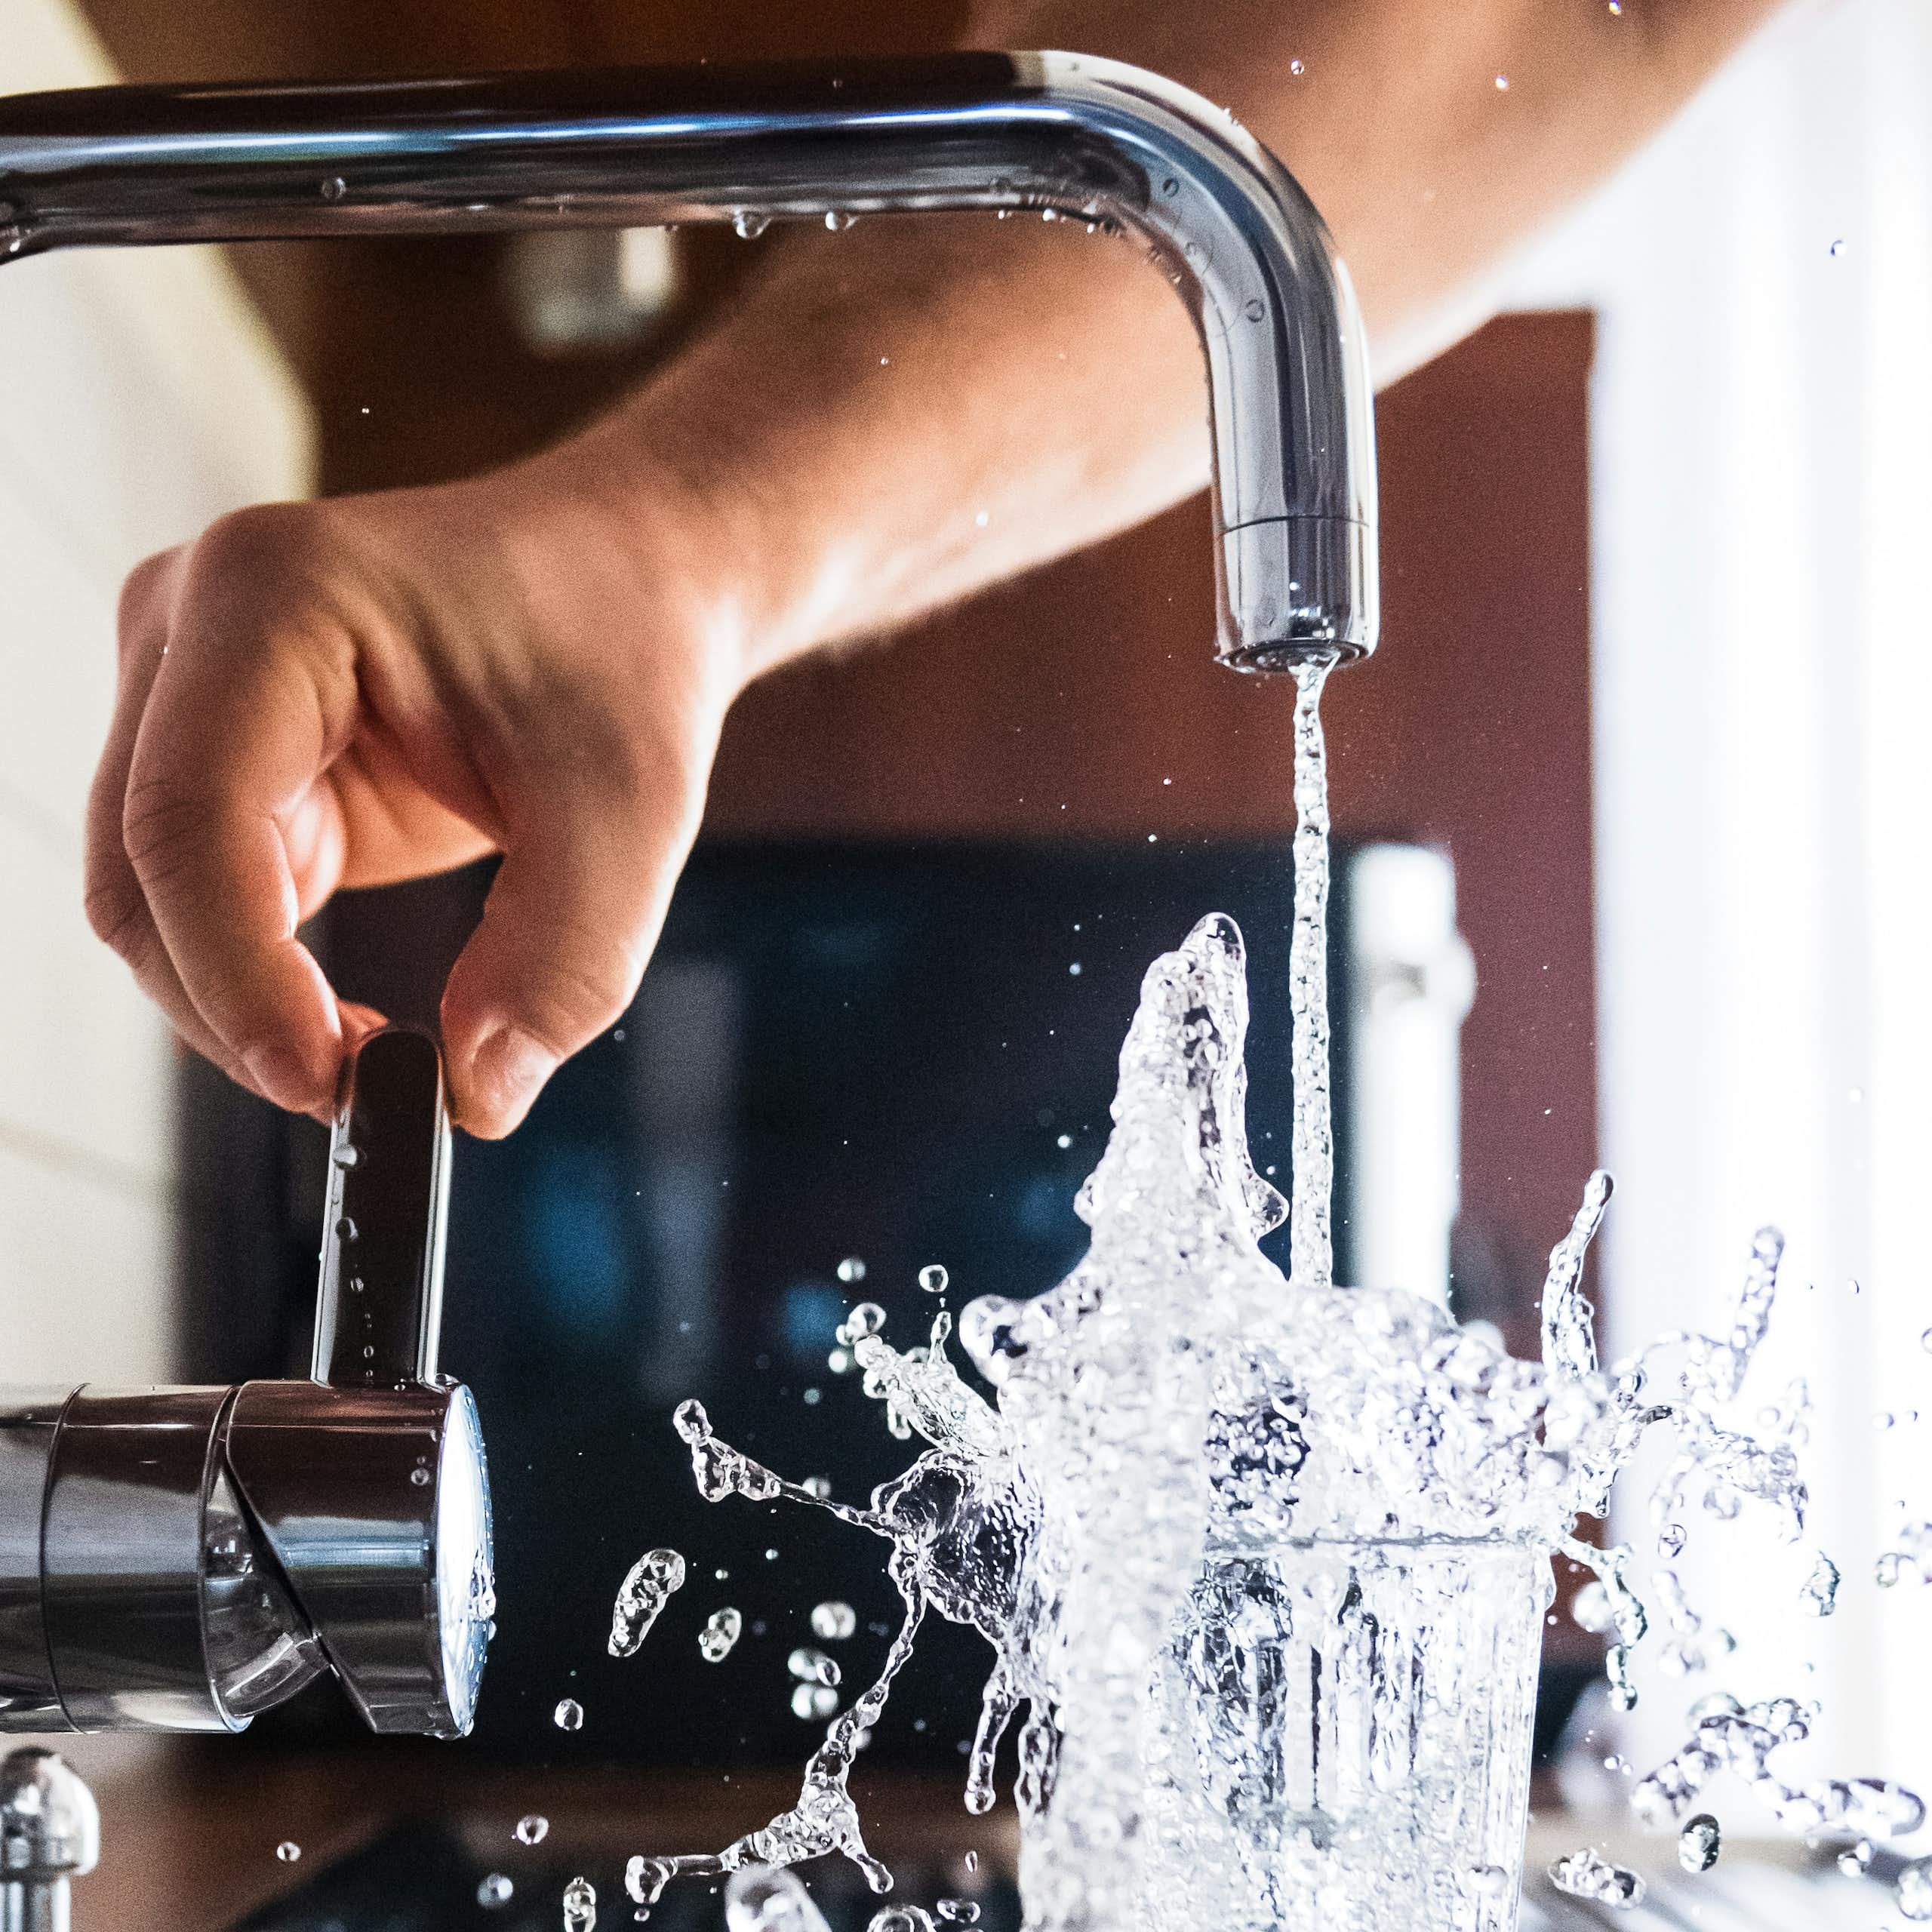 Removing PFAS from public water systems will cost billions and take time – here are ways you can filter out harmful ‘forever chemicals’ at home